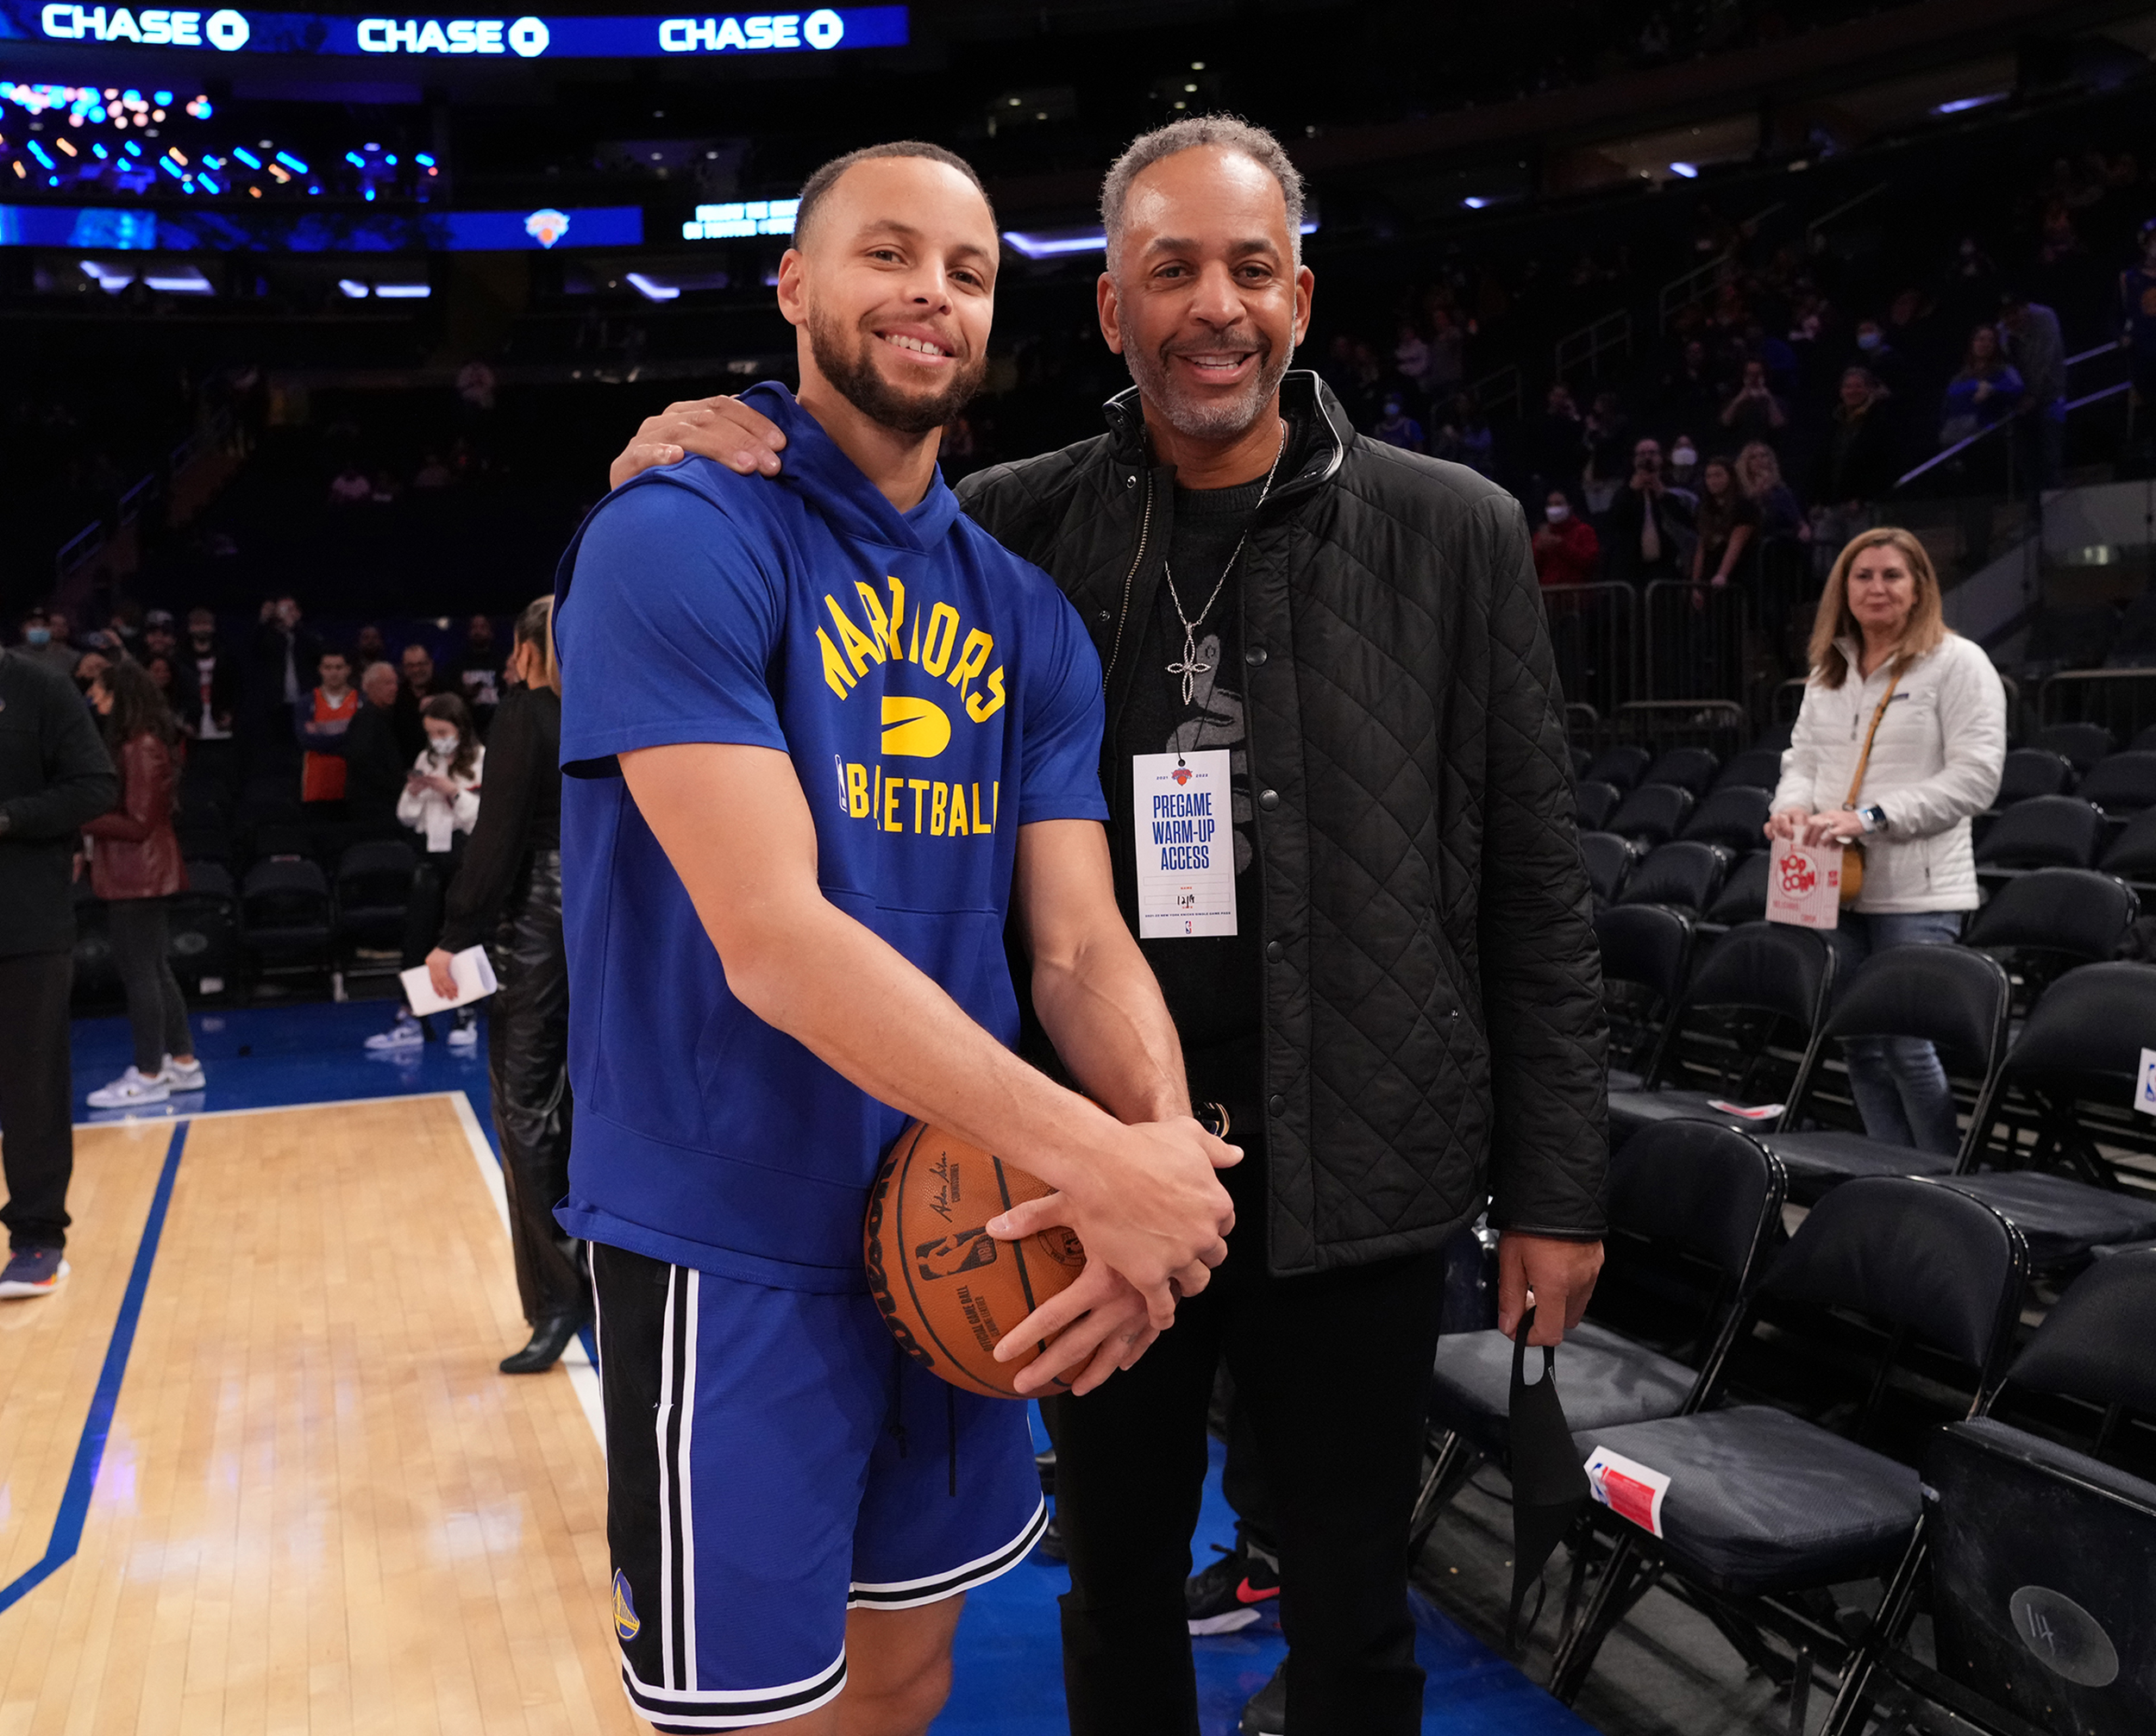 Stephen Curry credits God, family for his success